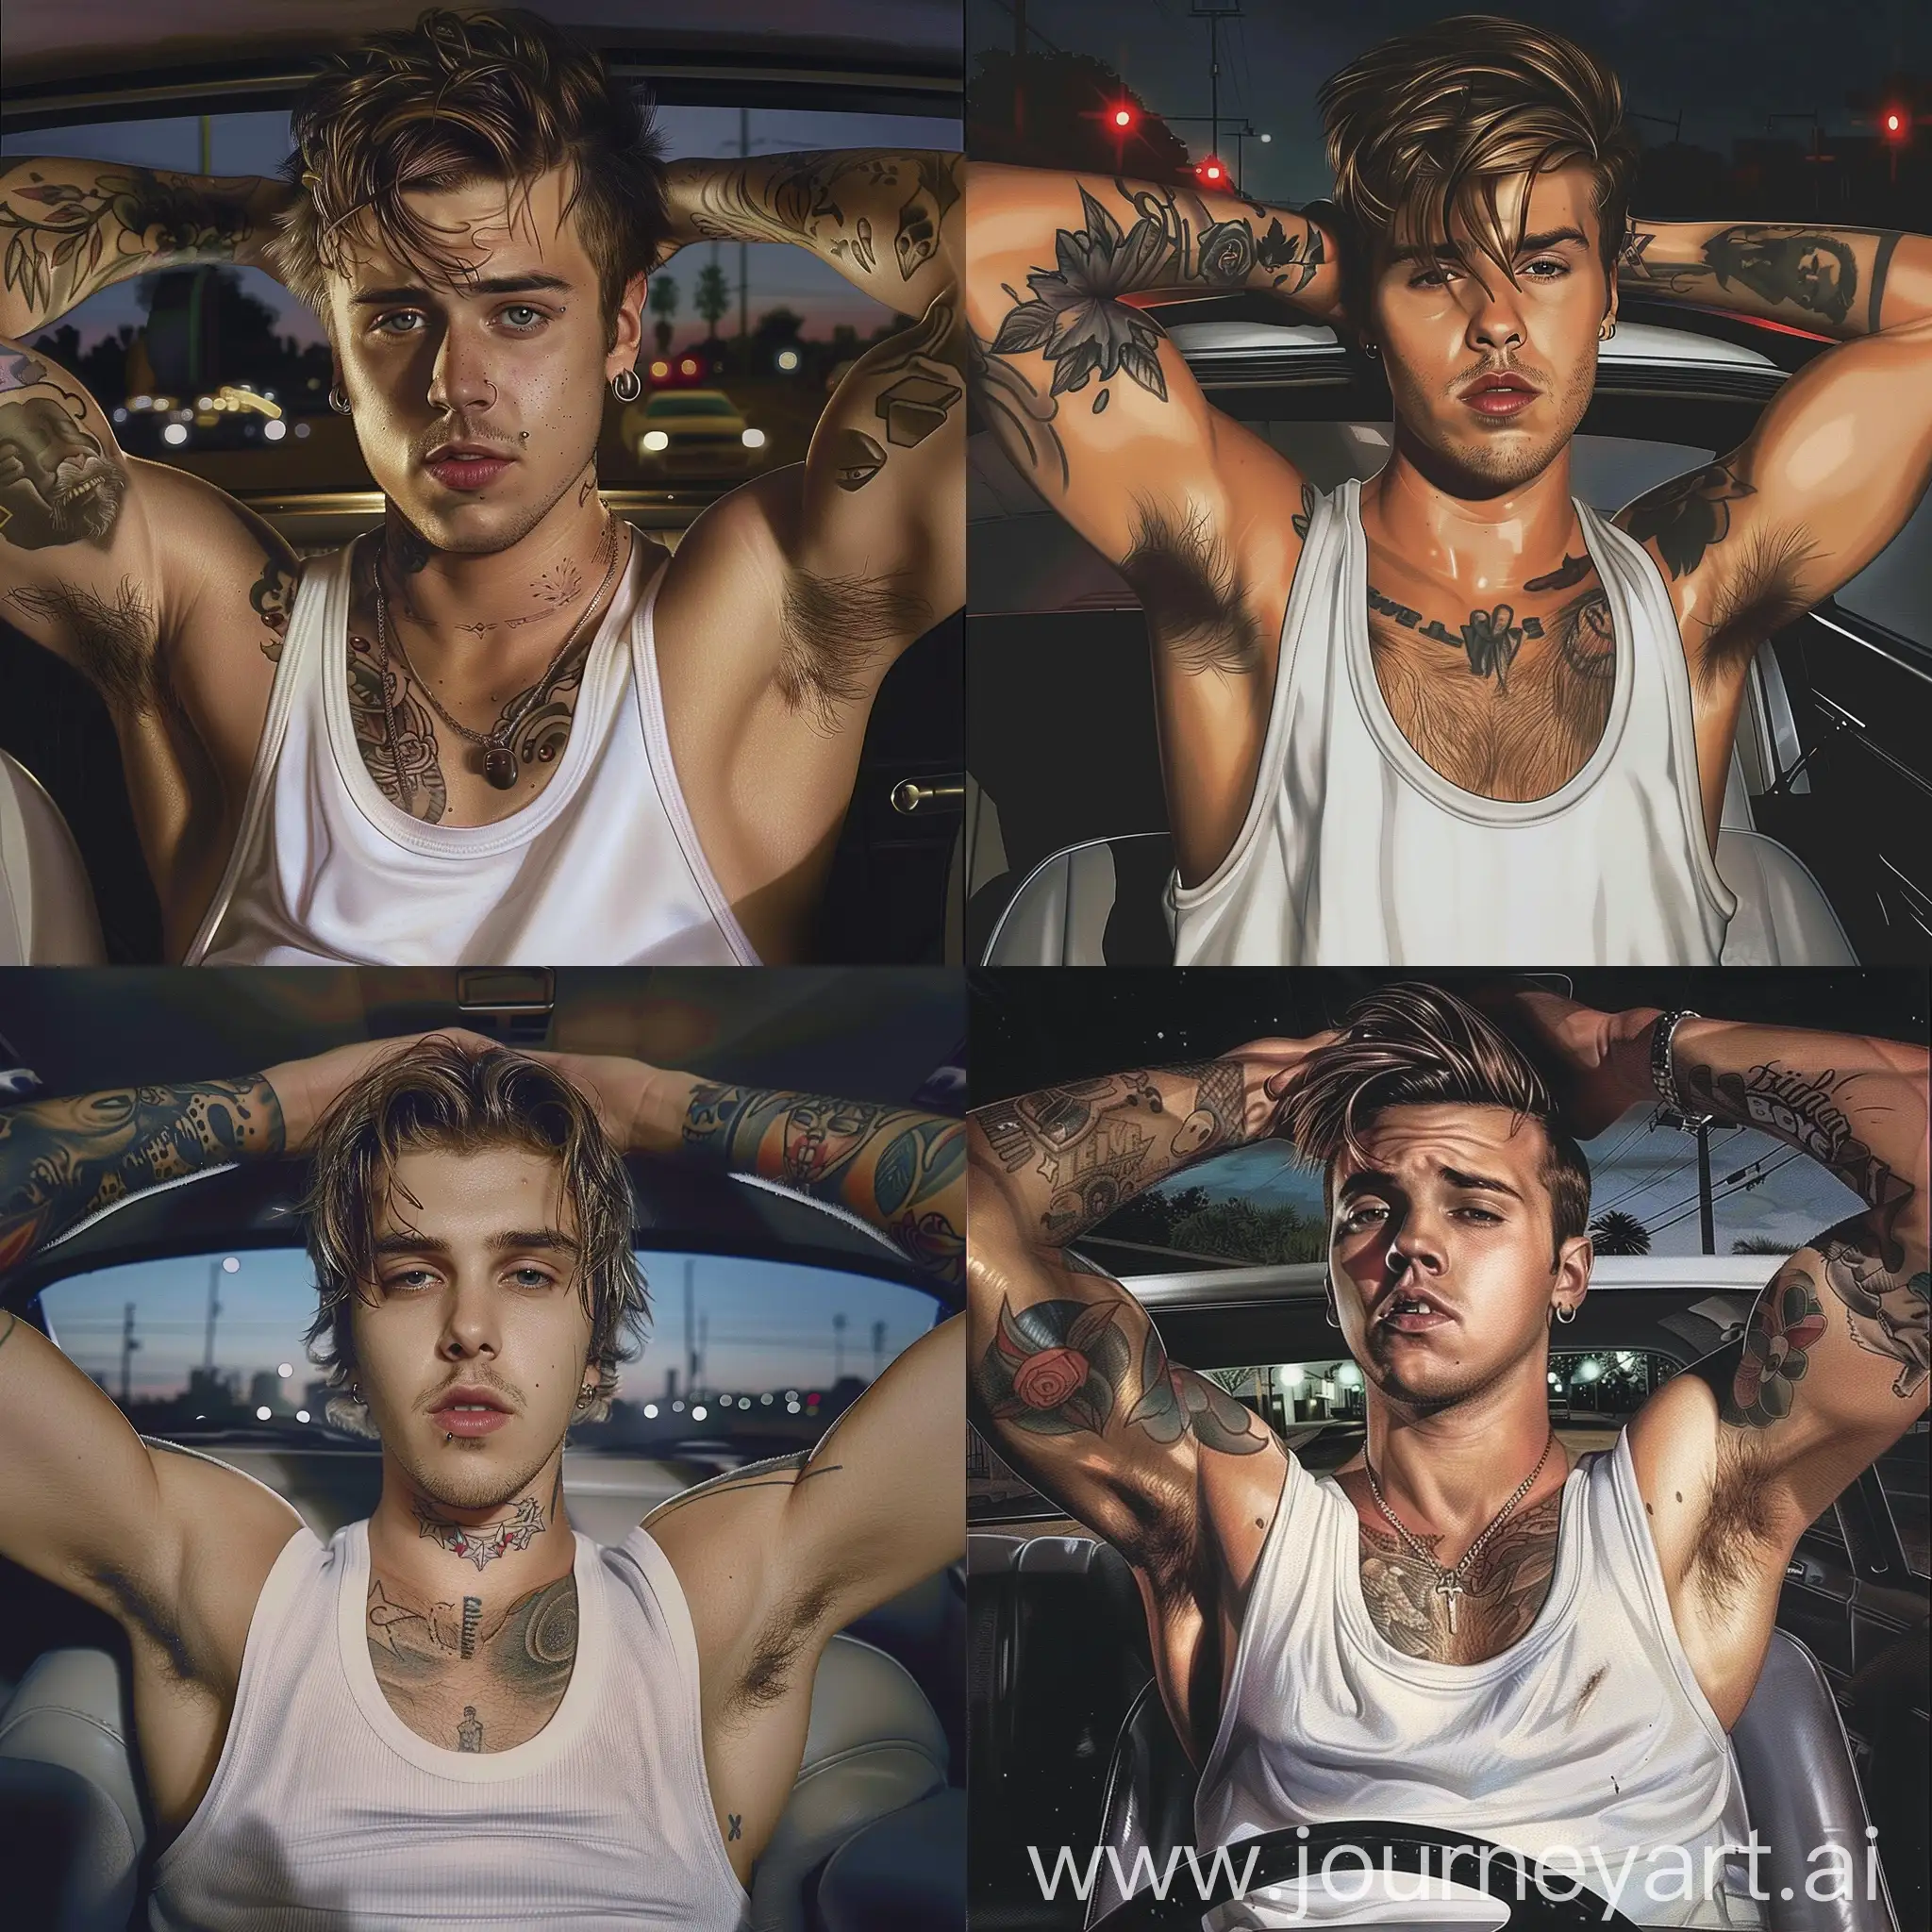 Realistic, Handsome fit Justin Bieber inside a car, good looking Justin Bieber wearing a white tank top with arms up showing hairy armpits, tattooed arms, tattooed neck, good looking young Justin Bieber face, night time background